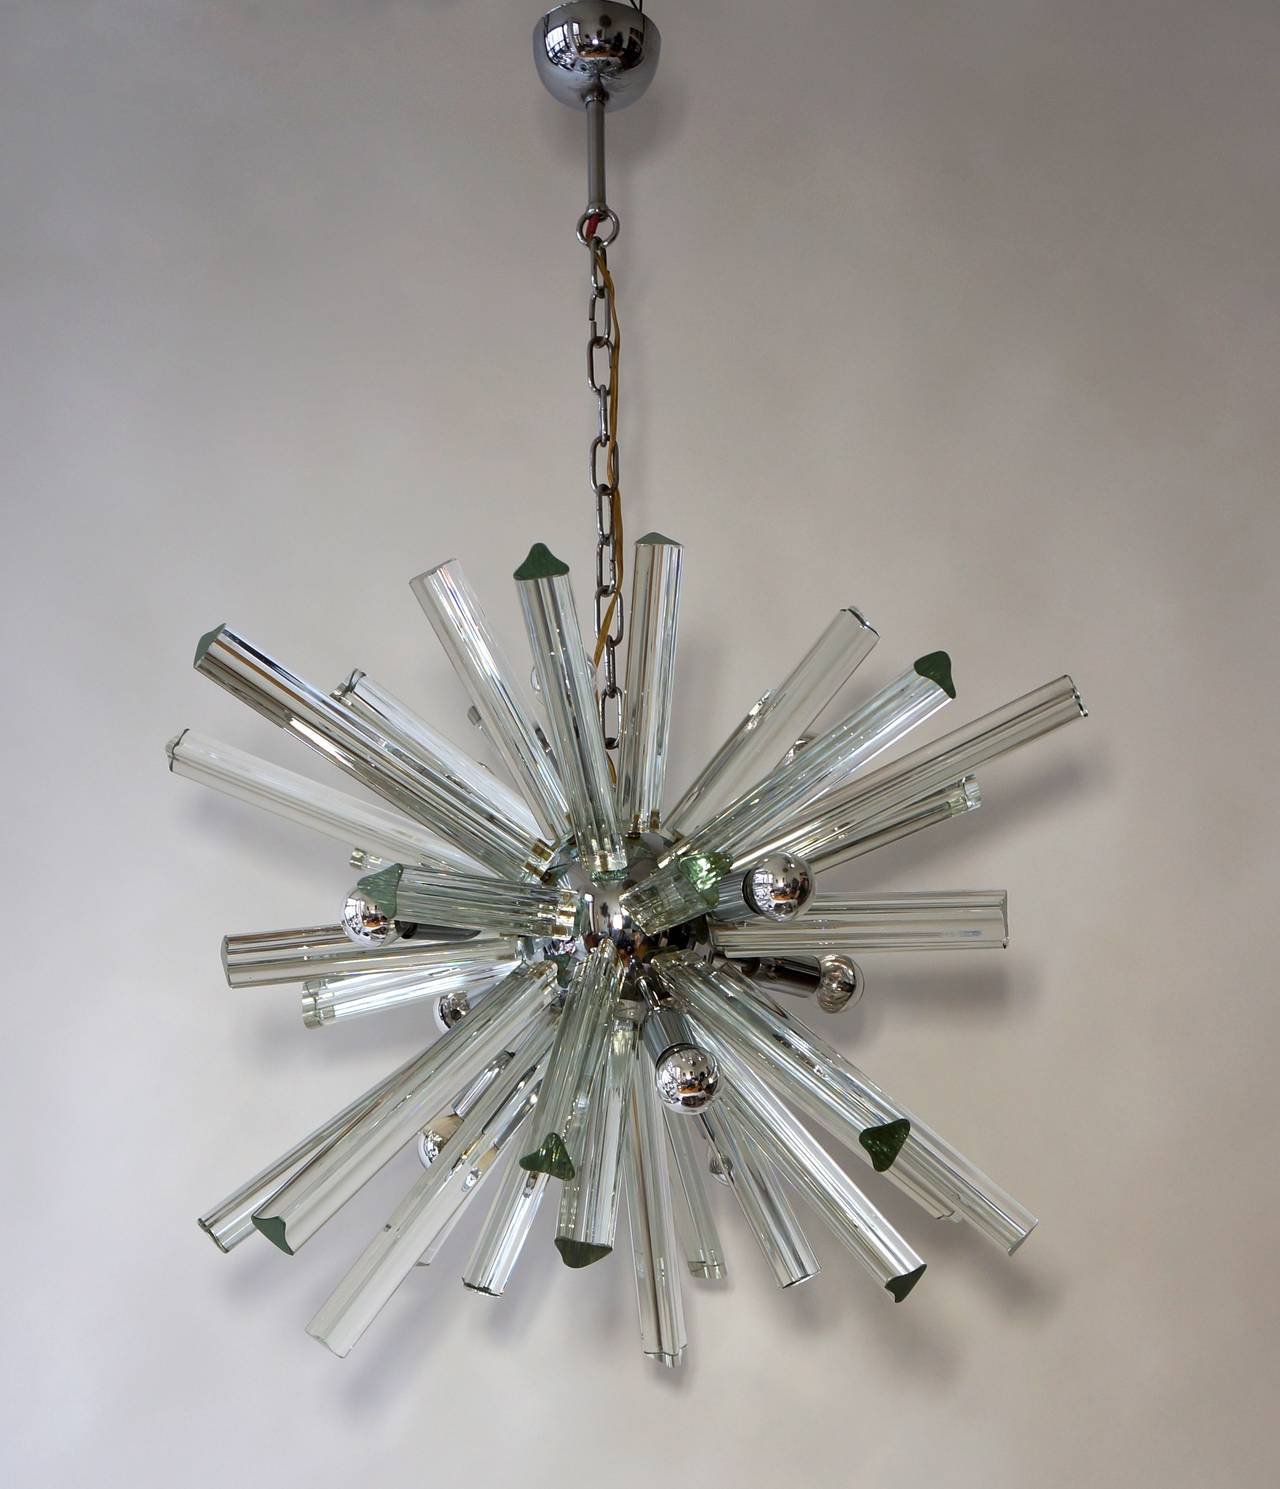 A Mid-Century Modernist chandelier feature a sputnik design, numerous Murano glass triedre shaped rods emanating from a chrome spherical centre, it has nine European based bulbs (max 75 watts per bulb)
The hanging height can be adjusted to suit